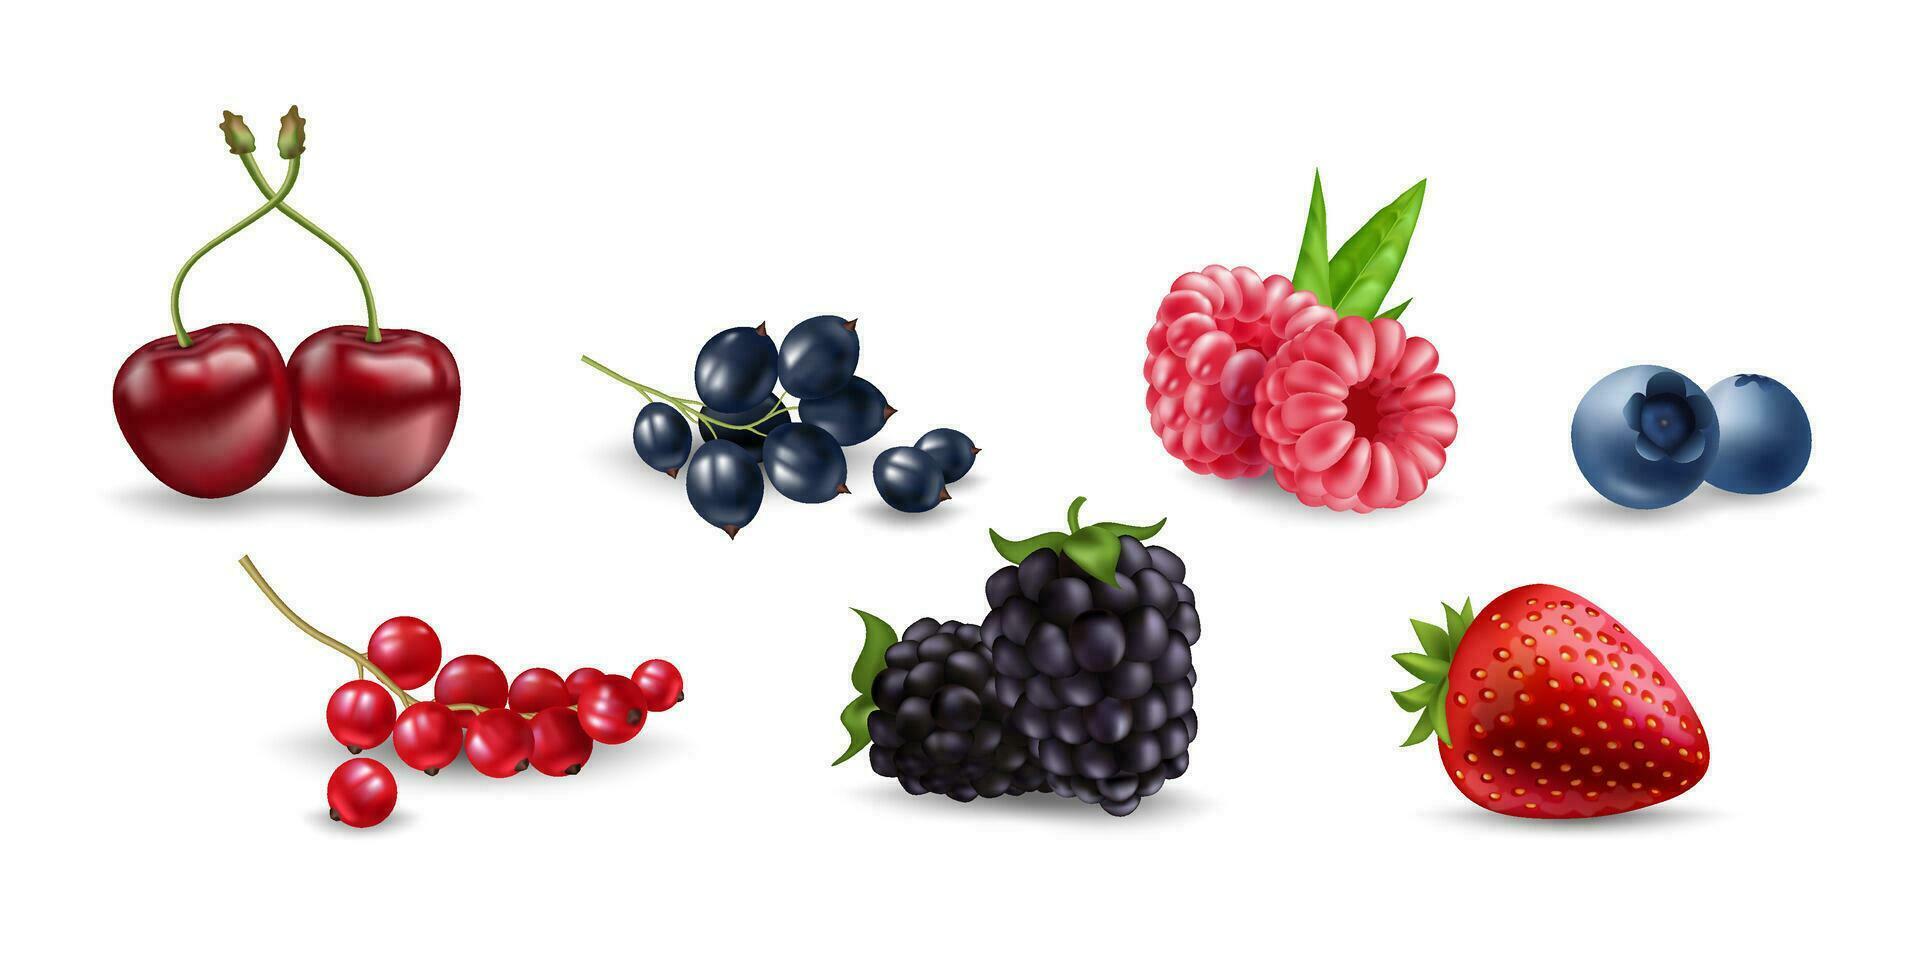 Juicy vector berries raspberry, blueberry, cherry, currant, blackberry, strawberry on white background. Fresh, realistic, and organic fruit illustrations. Ideal for food, health, and nature designs.